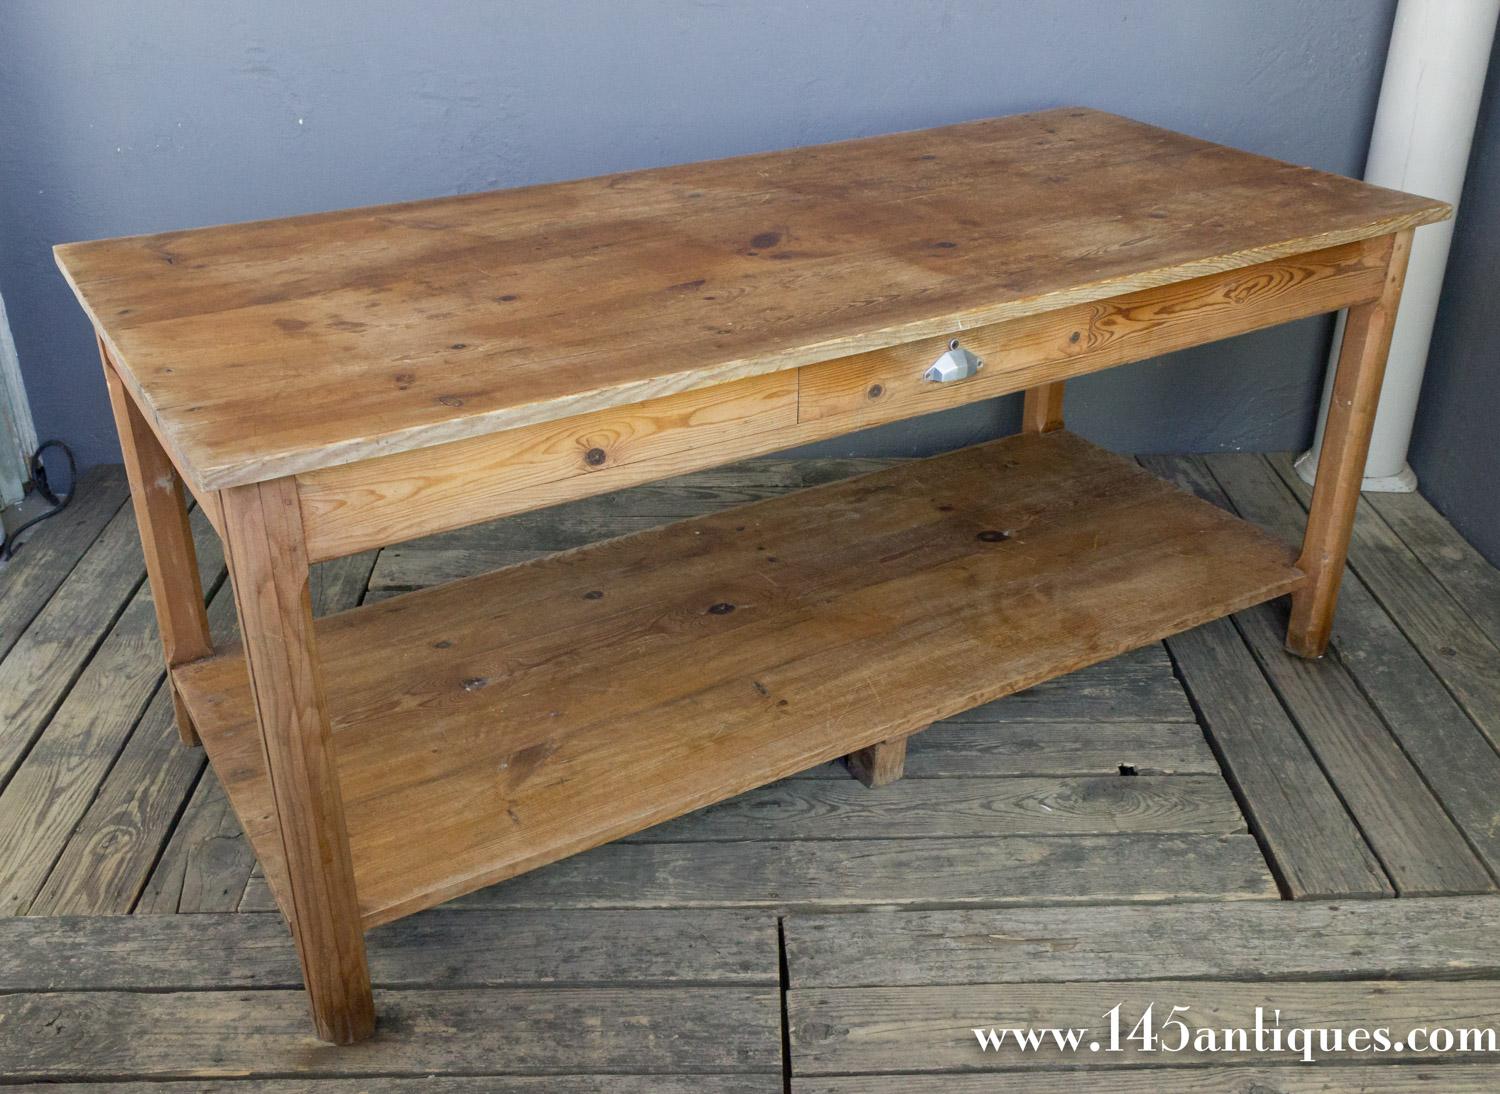 French 1920s pine farm table with a drawer with original hardware and a shelf underneath. Very good vintage condition.